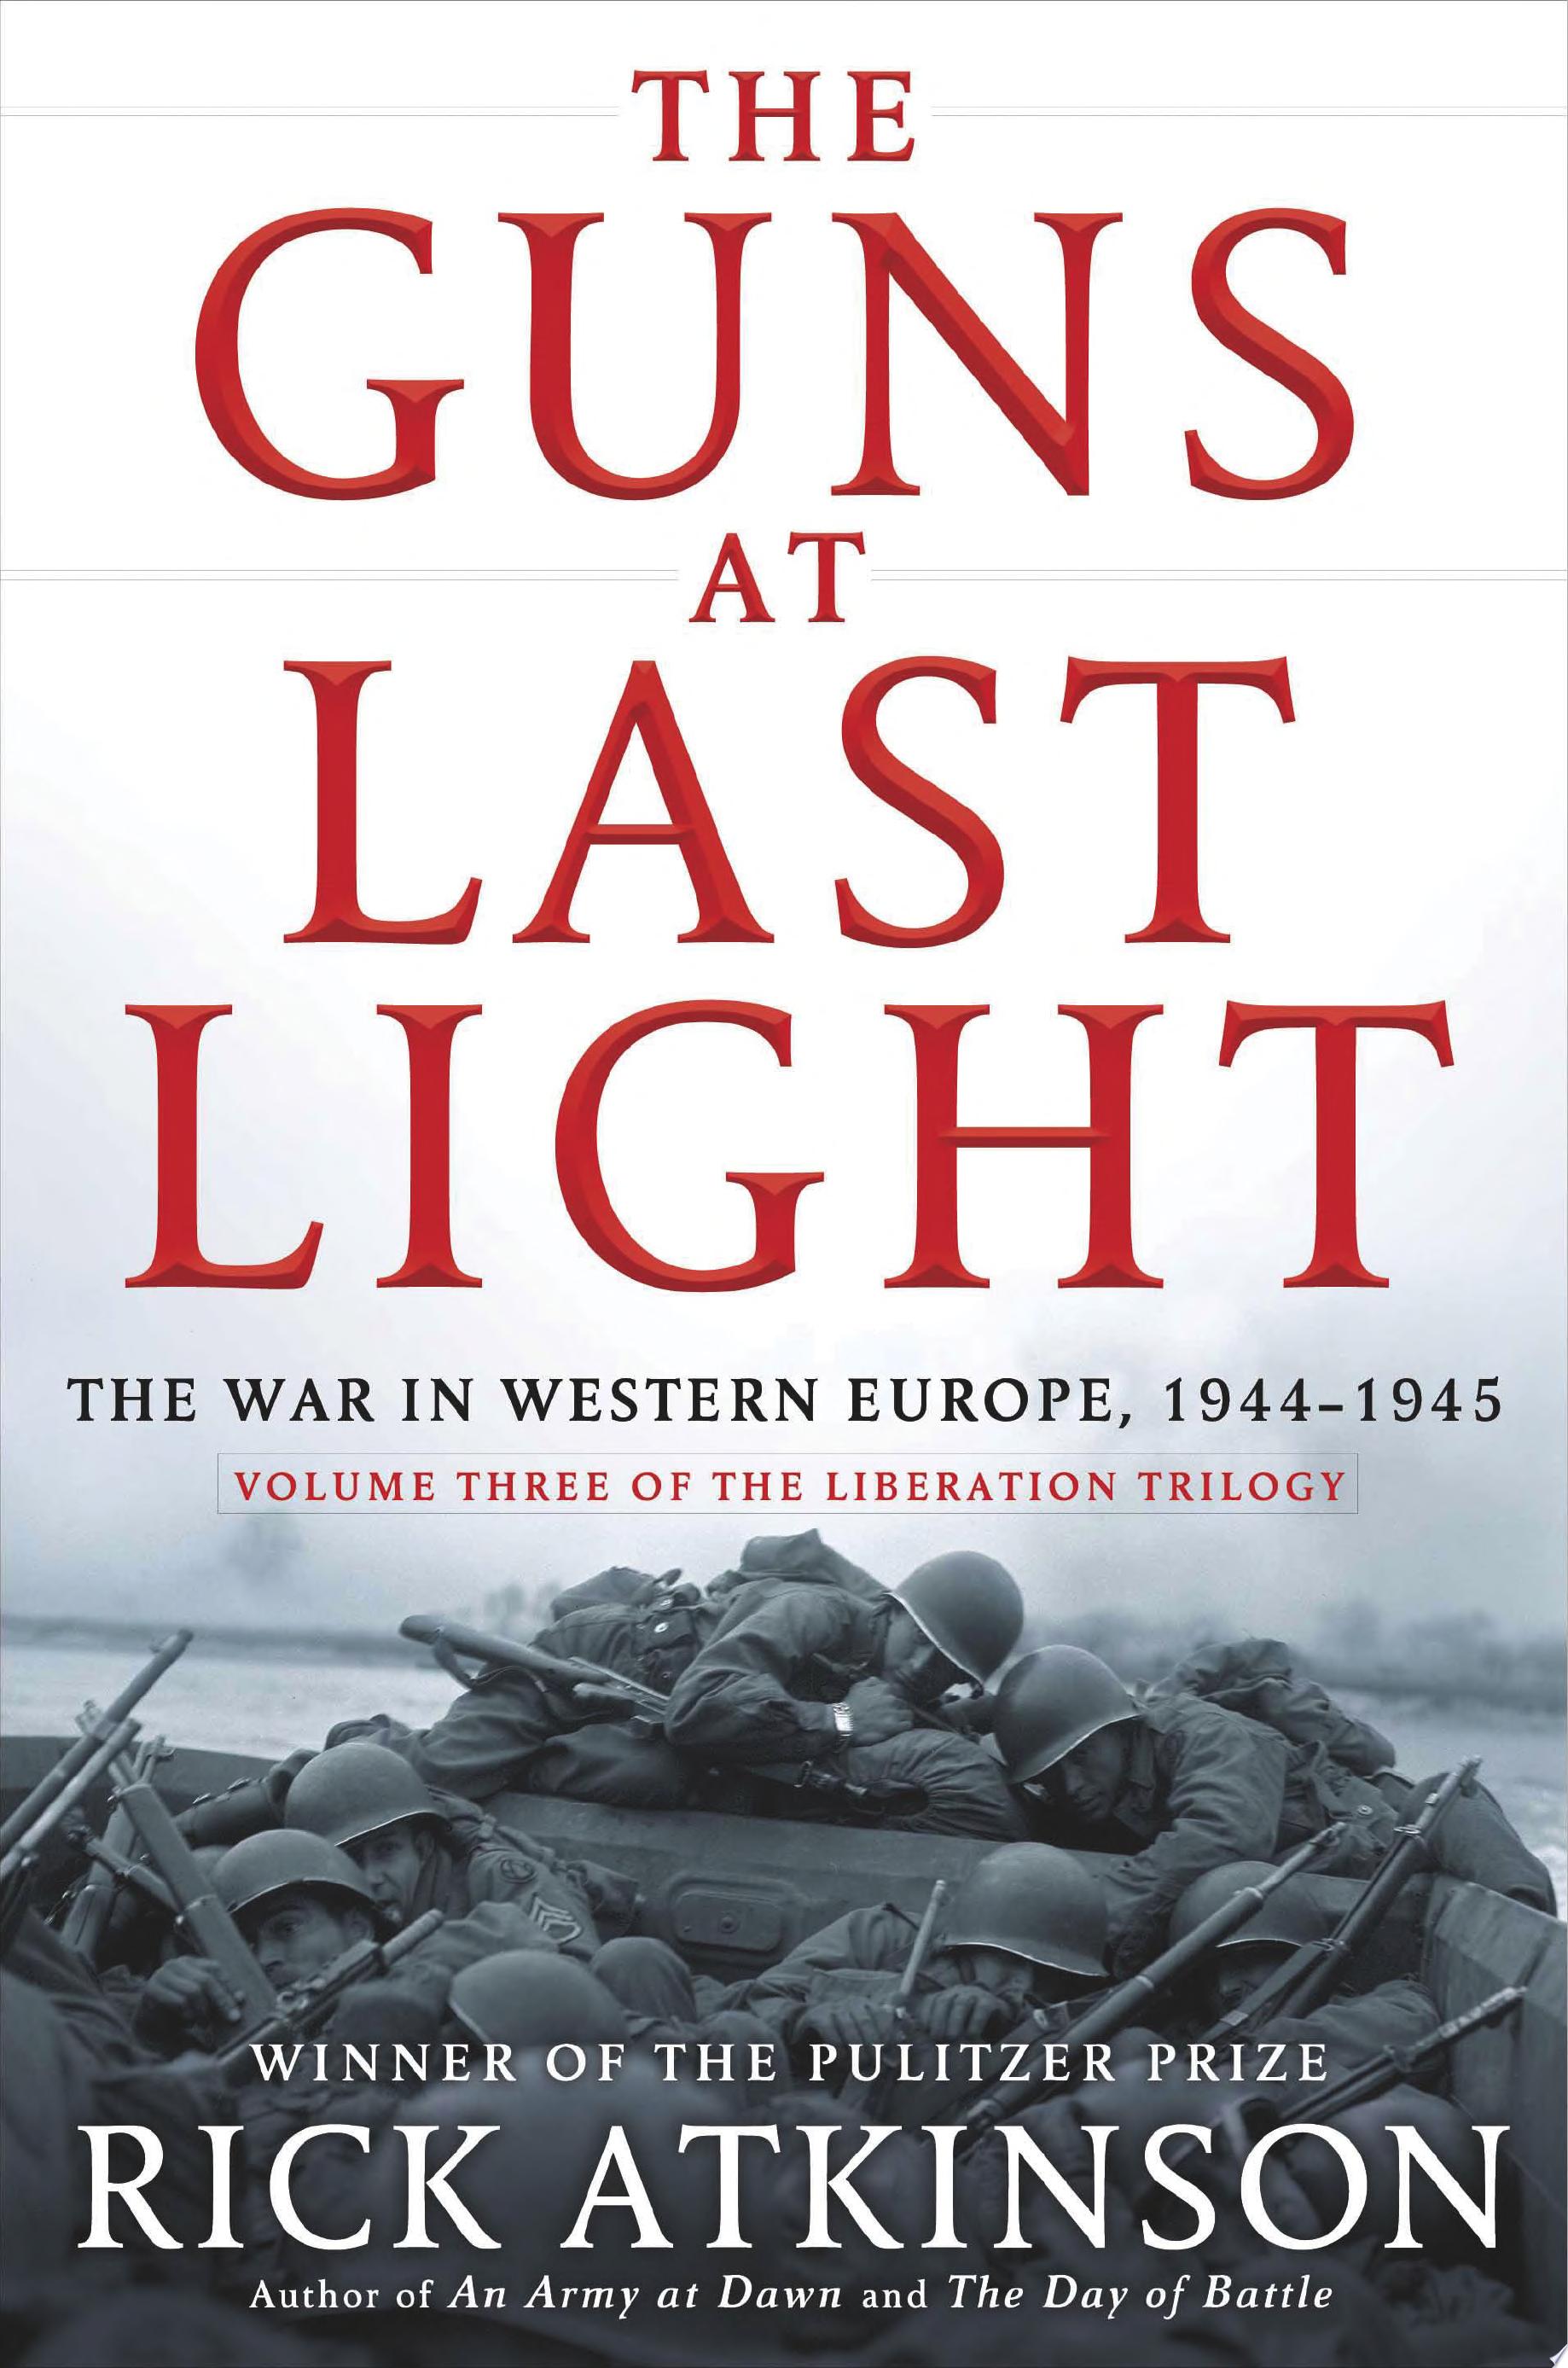 Image for "The Guns at Last Light"